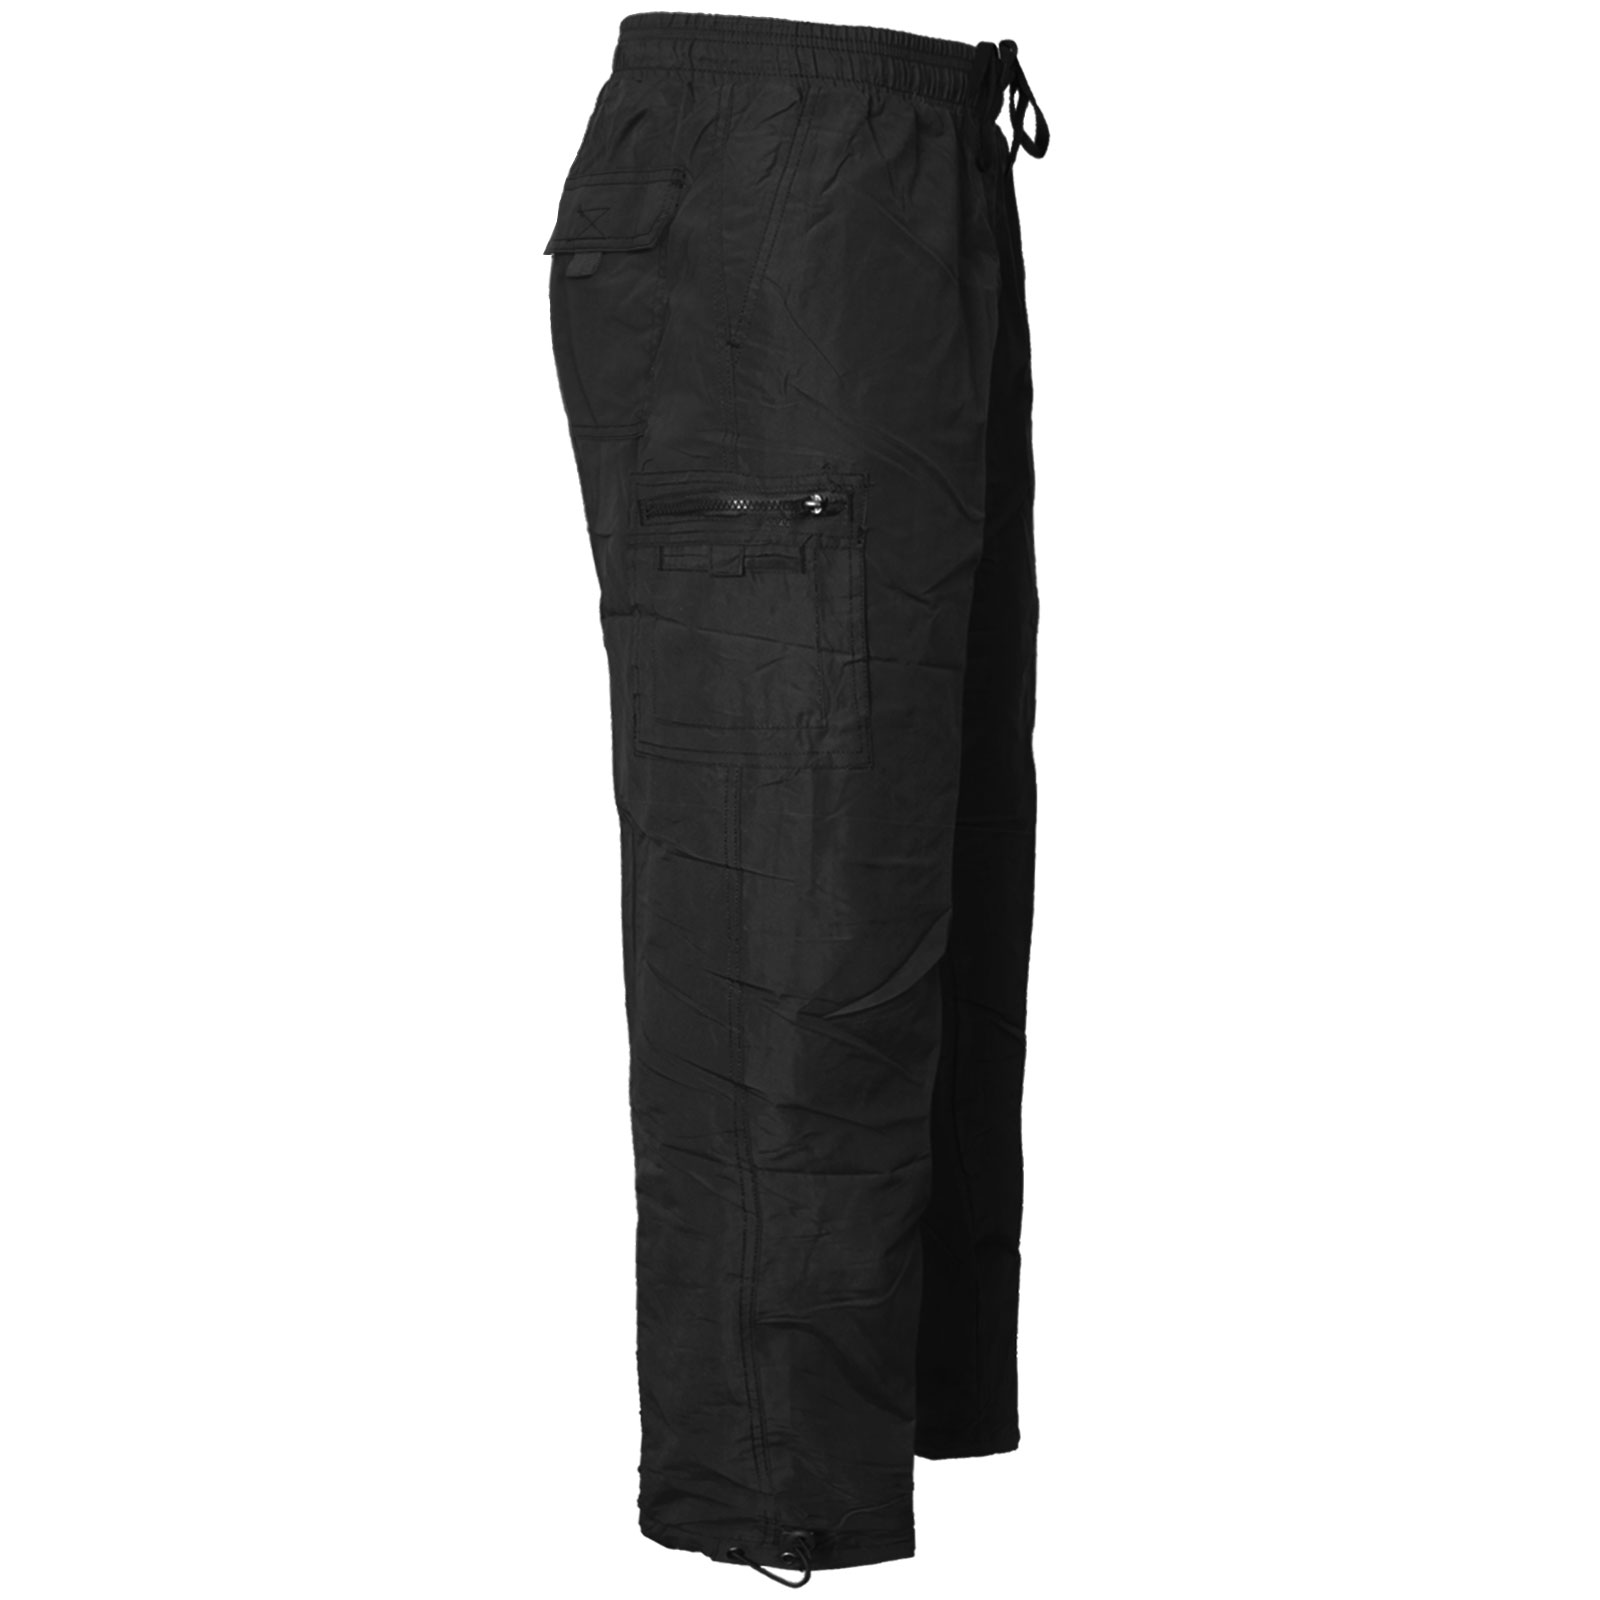 MENS CARGO COMBAT FLEECE LINED THERMAL ELASTICATED WINTER WORK BOTTOMS TROUSERS 